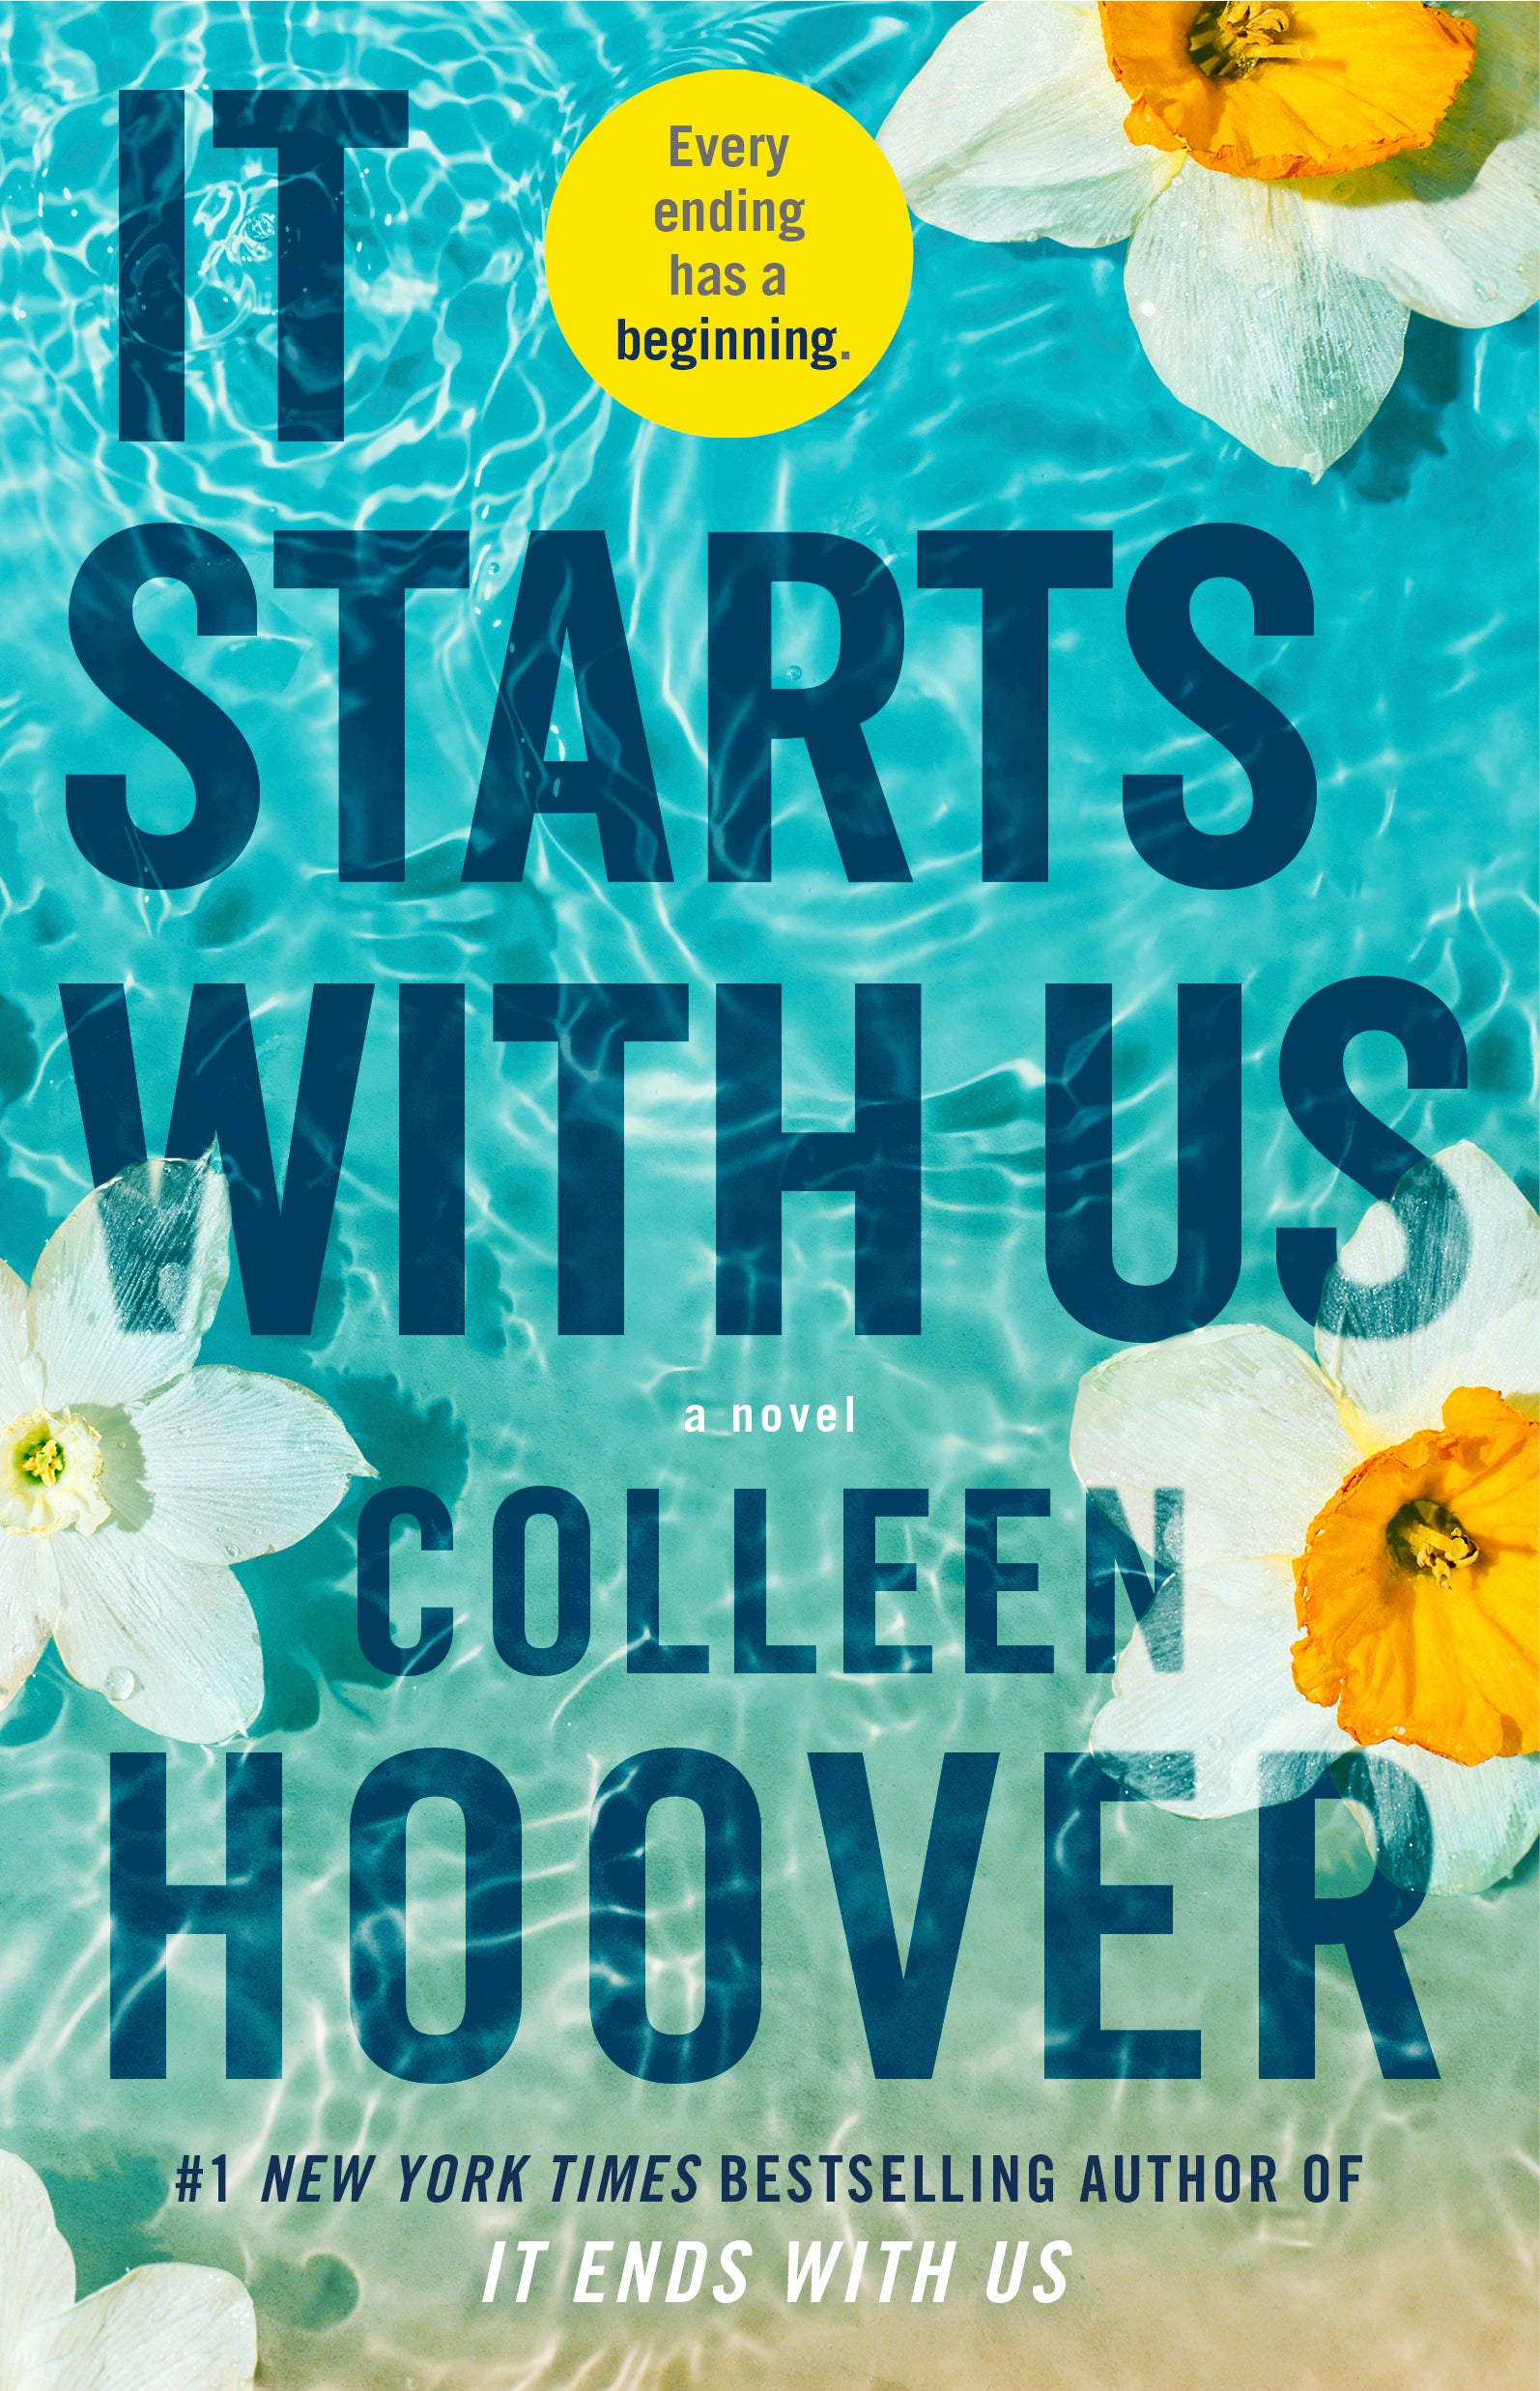 Two of Ms Hoover’s titles – It Ends With Us and It Stars With Us – are particularly popular (and debated) amongst readers